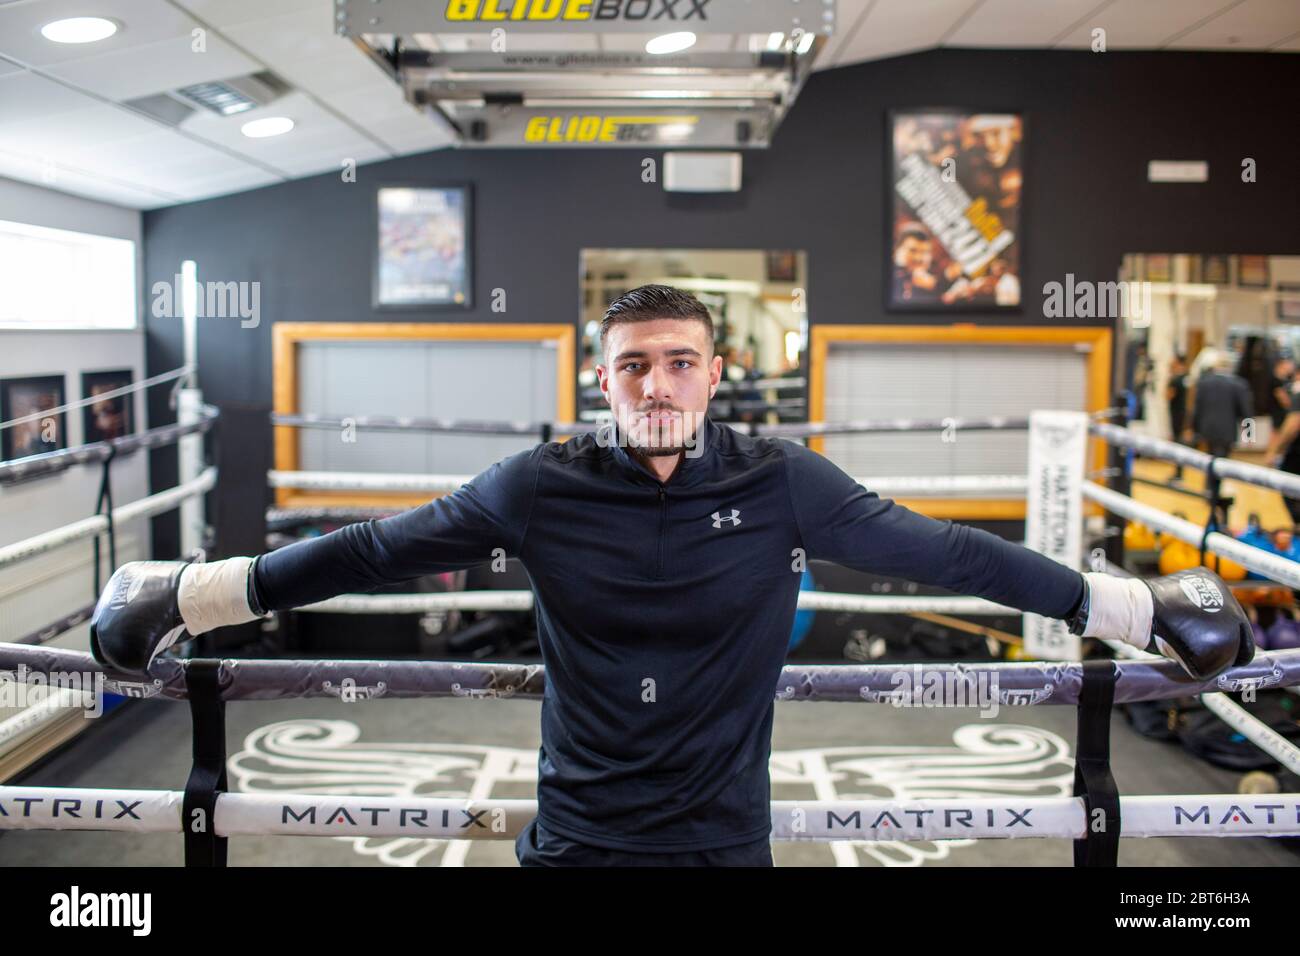 March 2019  Boxer Tommy Fury training at the Hatton Gym in Manchester Stock Photo